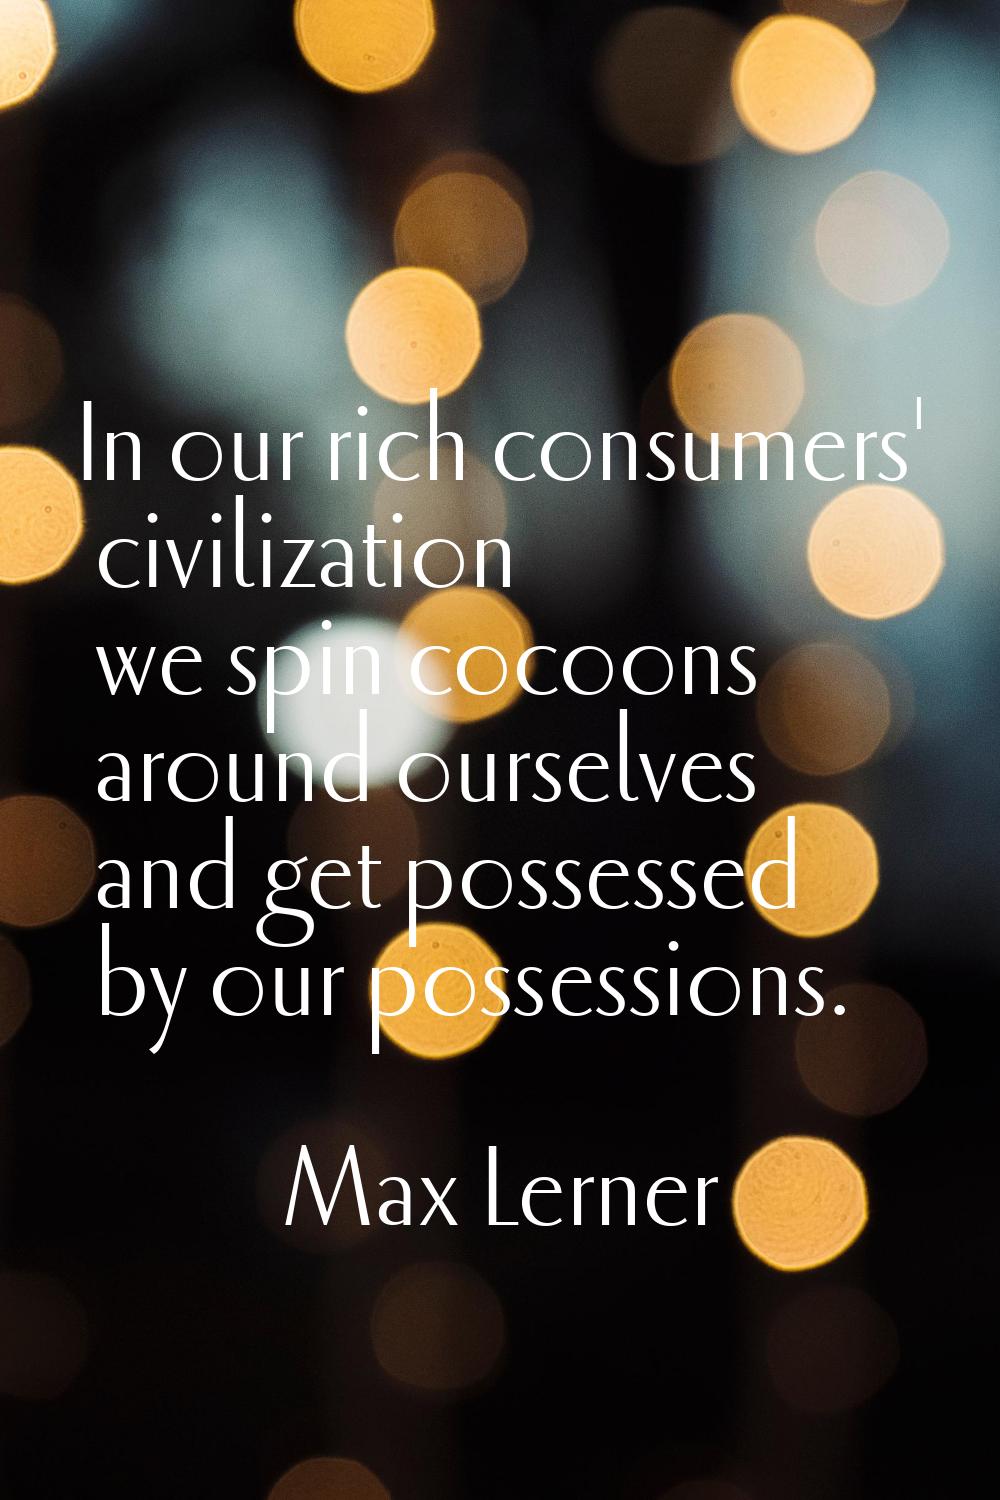 In our rich consumers' civilization we spin cocoons around ourselves and get possessed by our posse